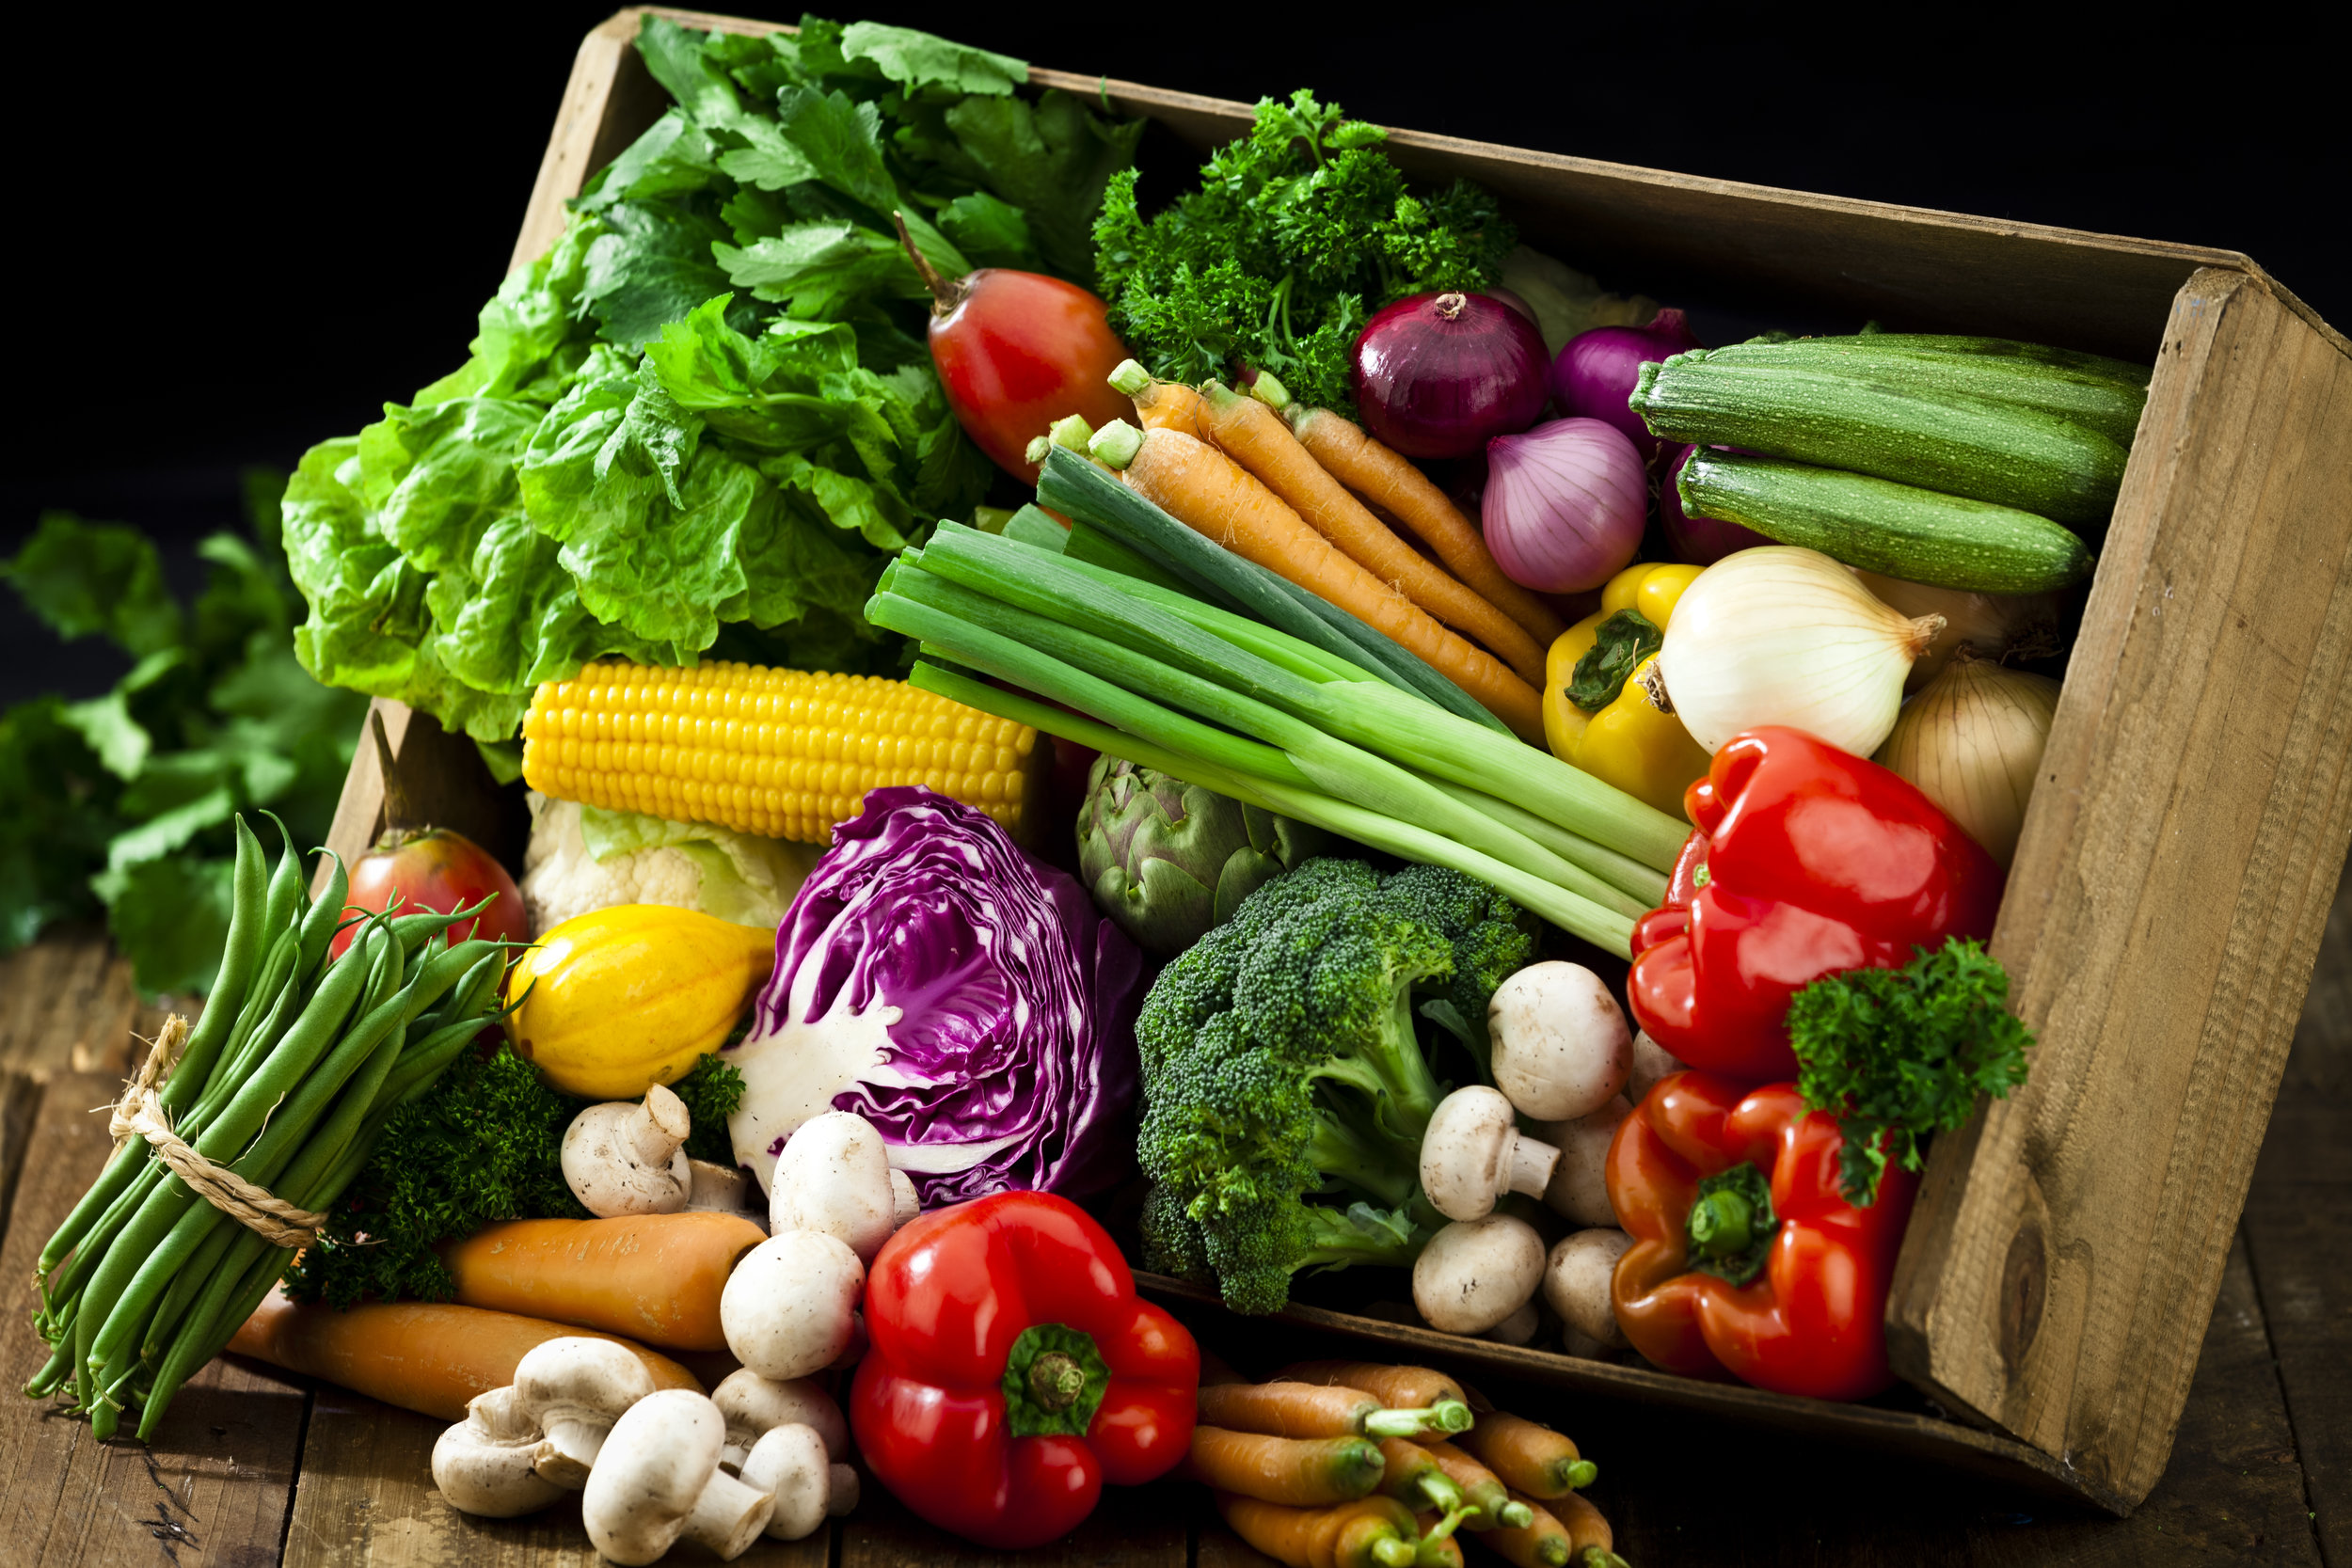 Wooden-crate-filled-with-fresh-organic-vegetables-484152000_5616x3744.jpeg